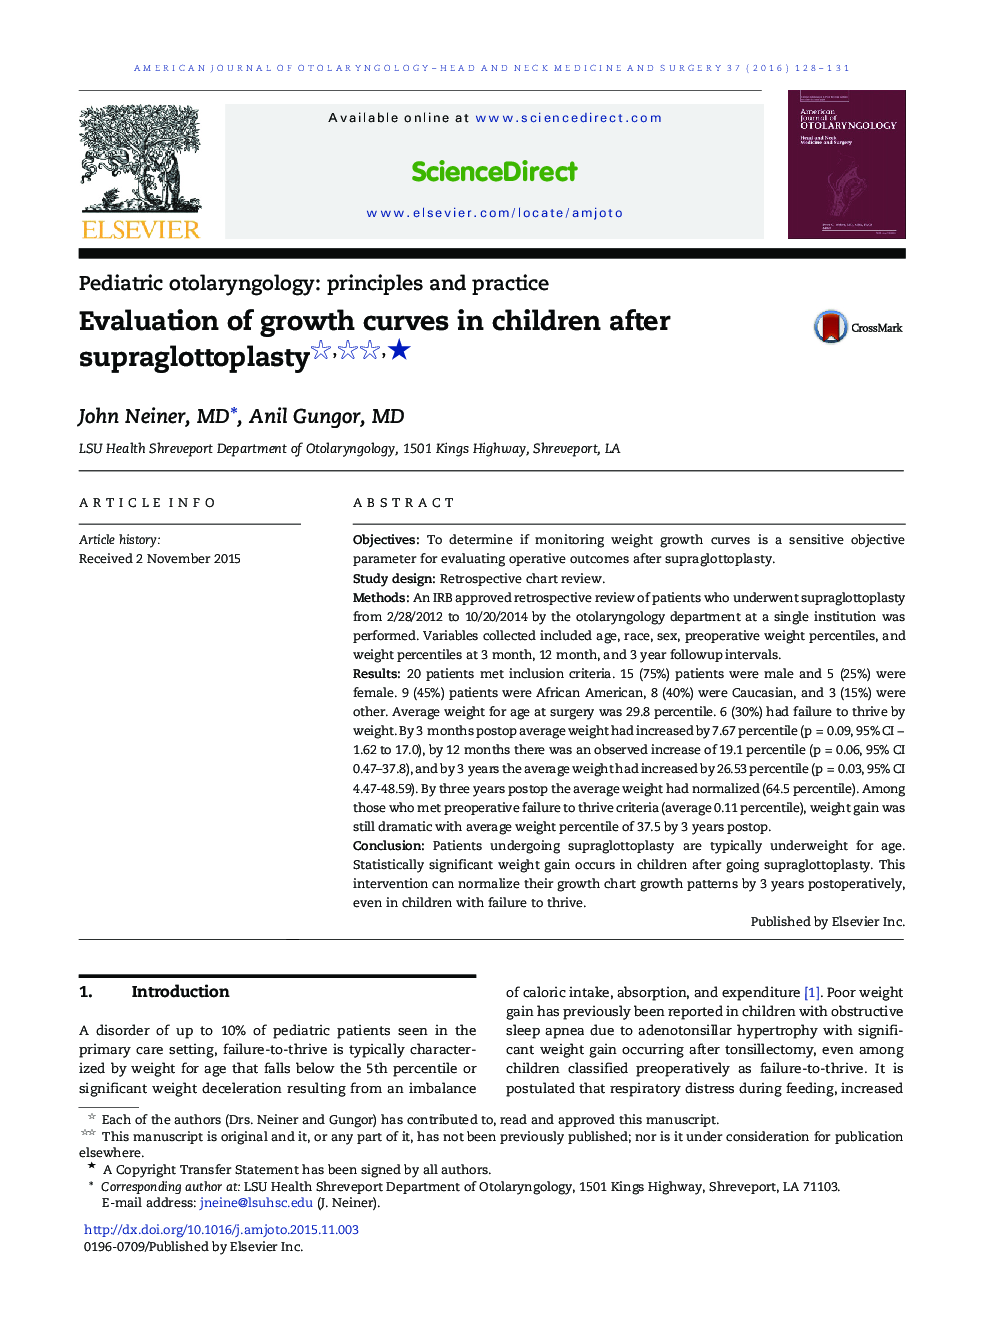 Evaluation of growth curves in children after supraglottoplasty ★